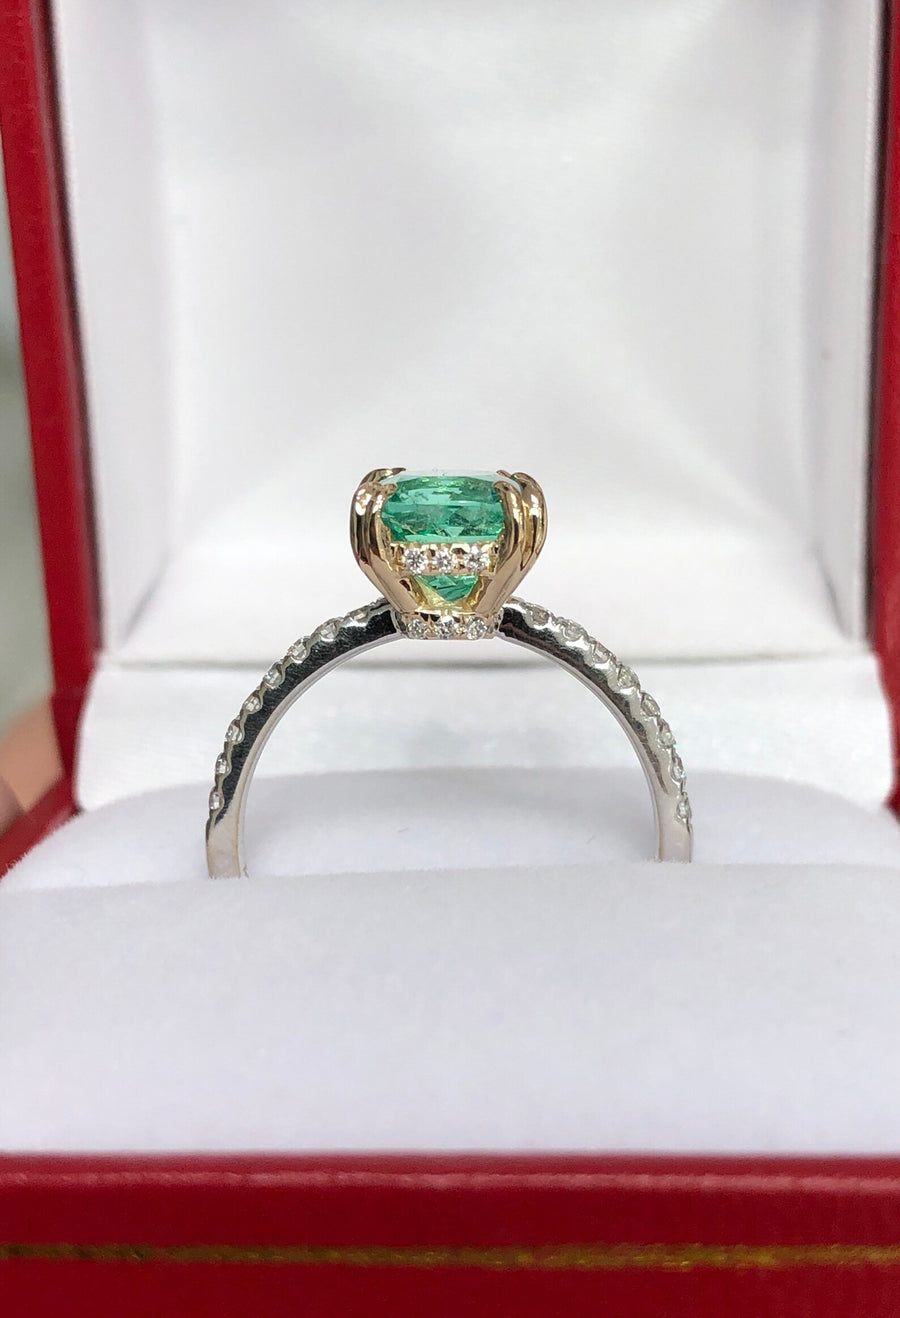 Captivating 14K Gold Engagement Ring Featuring a 2.30tcw Cushion Emerald